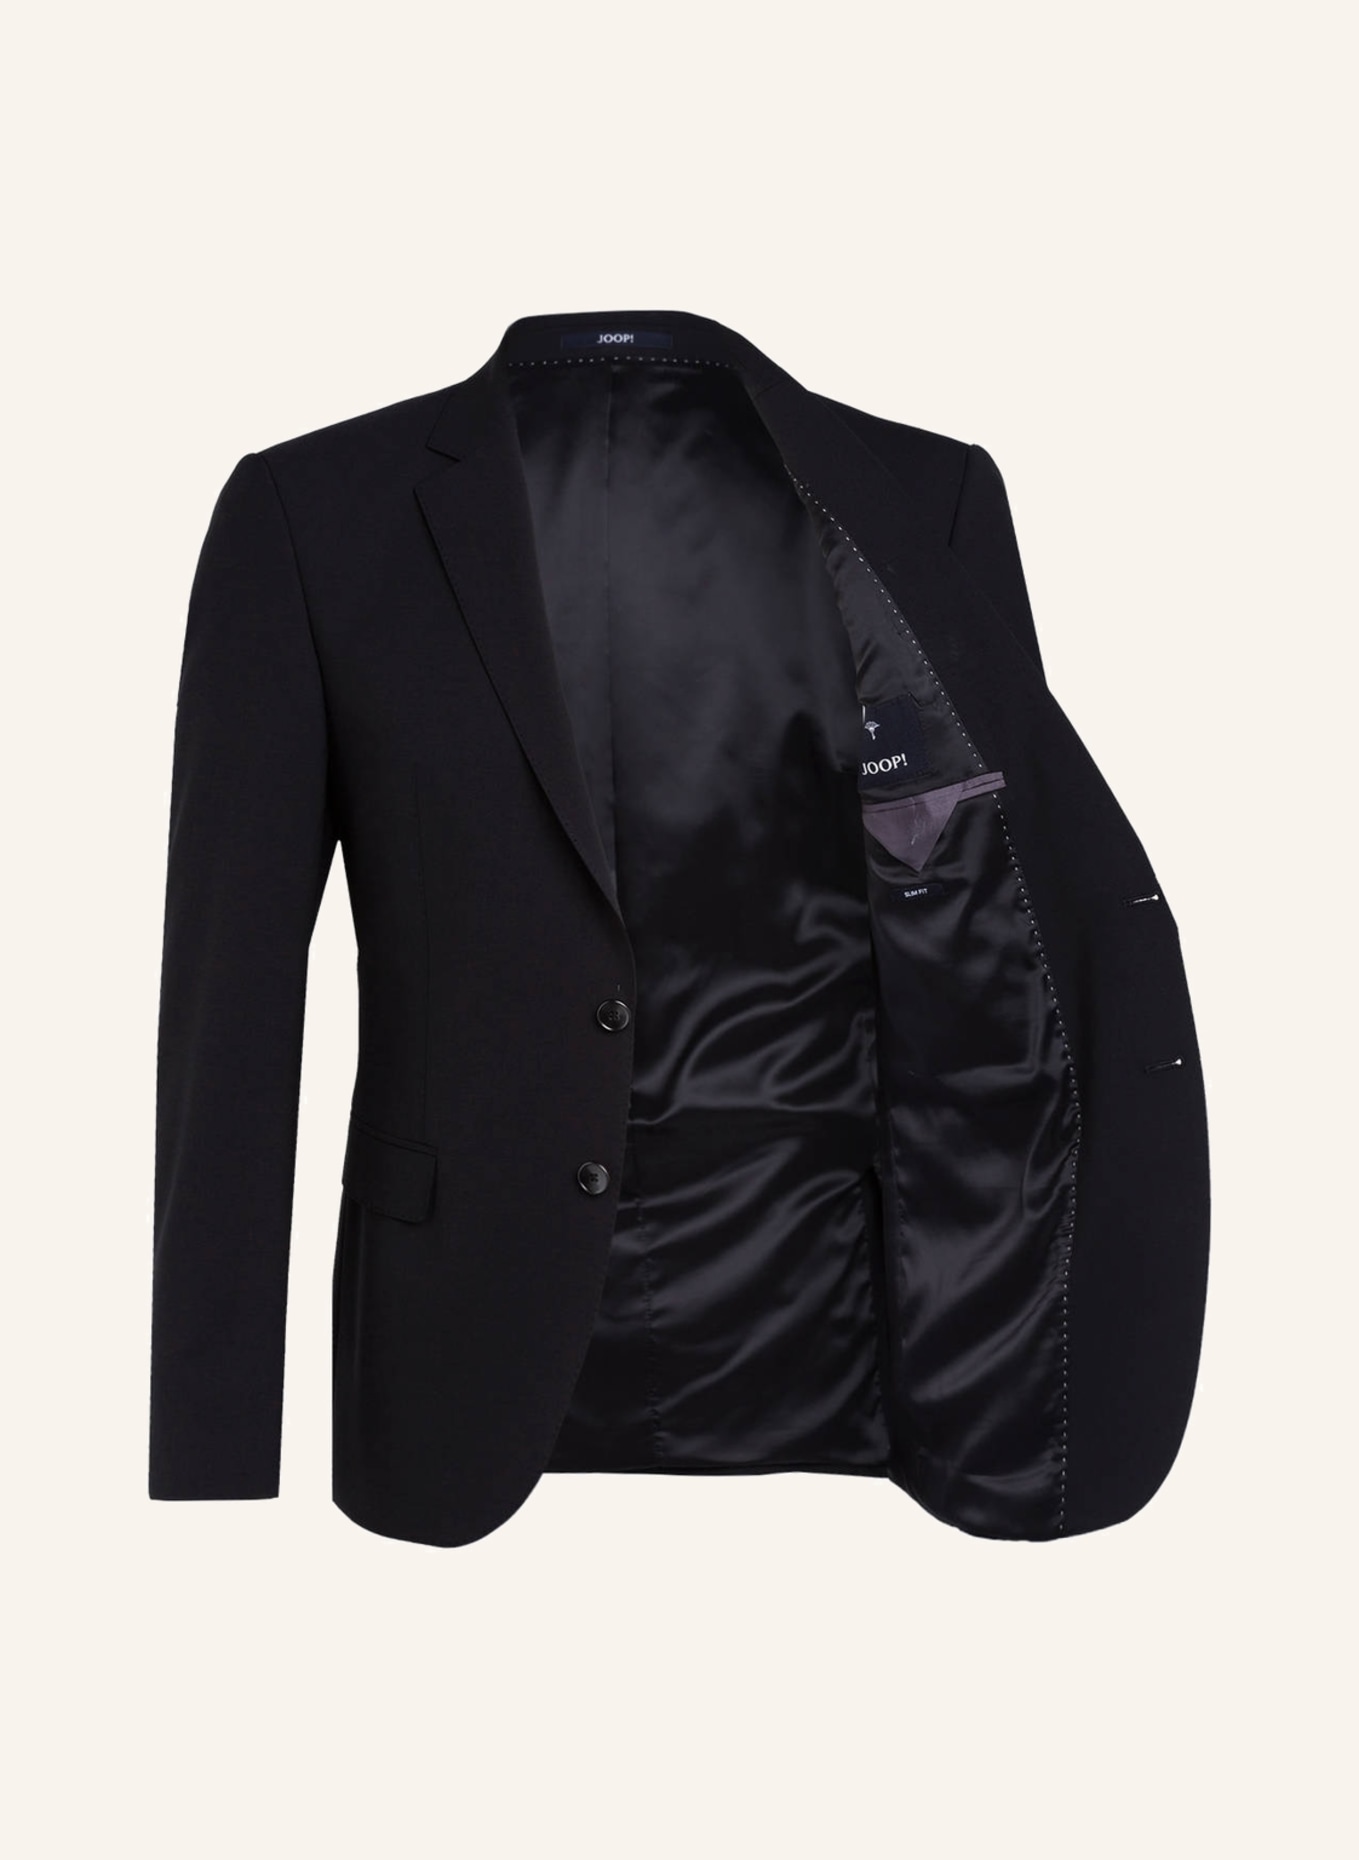 11 Navy Blazer Black Pants Outfits For Men Suits Expert, 51% OFF